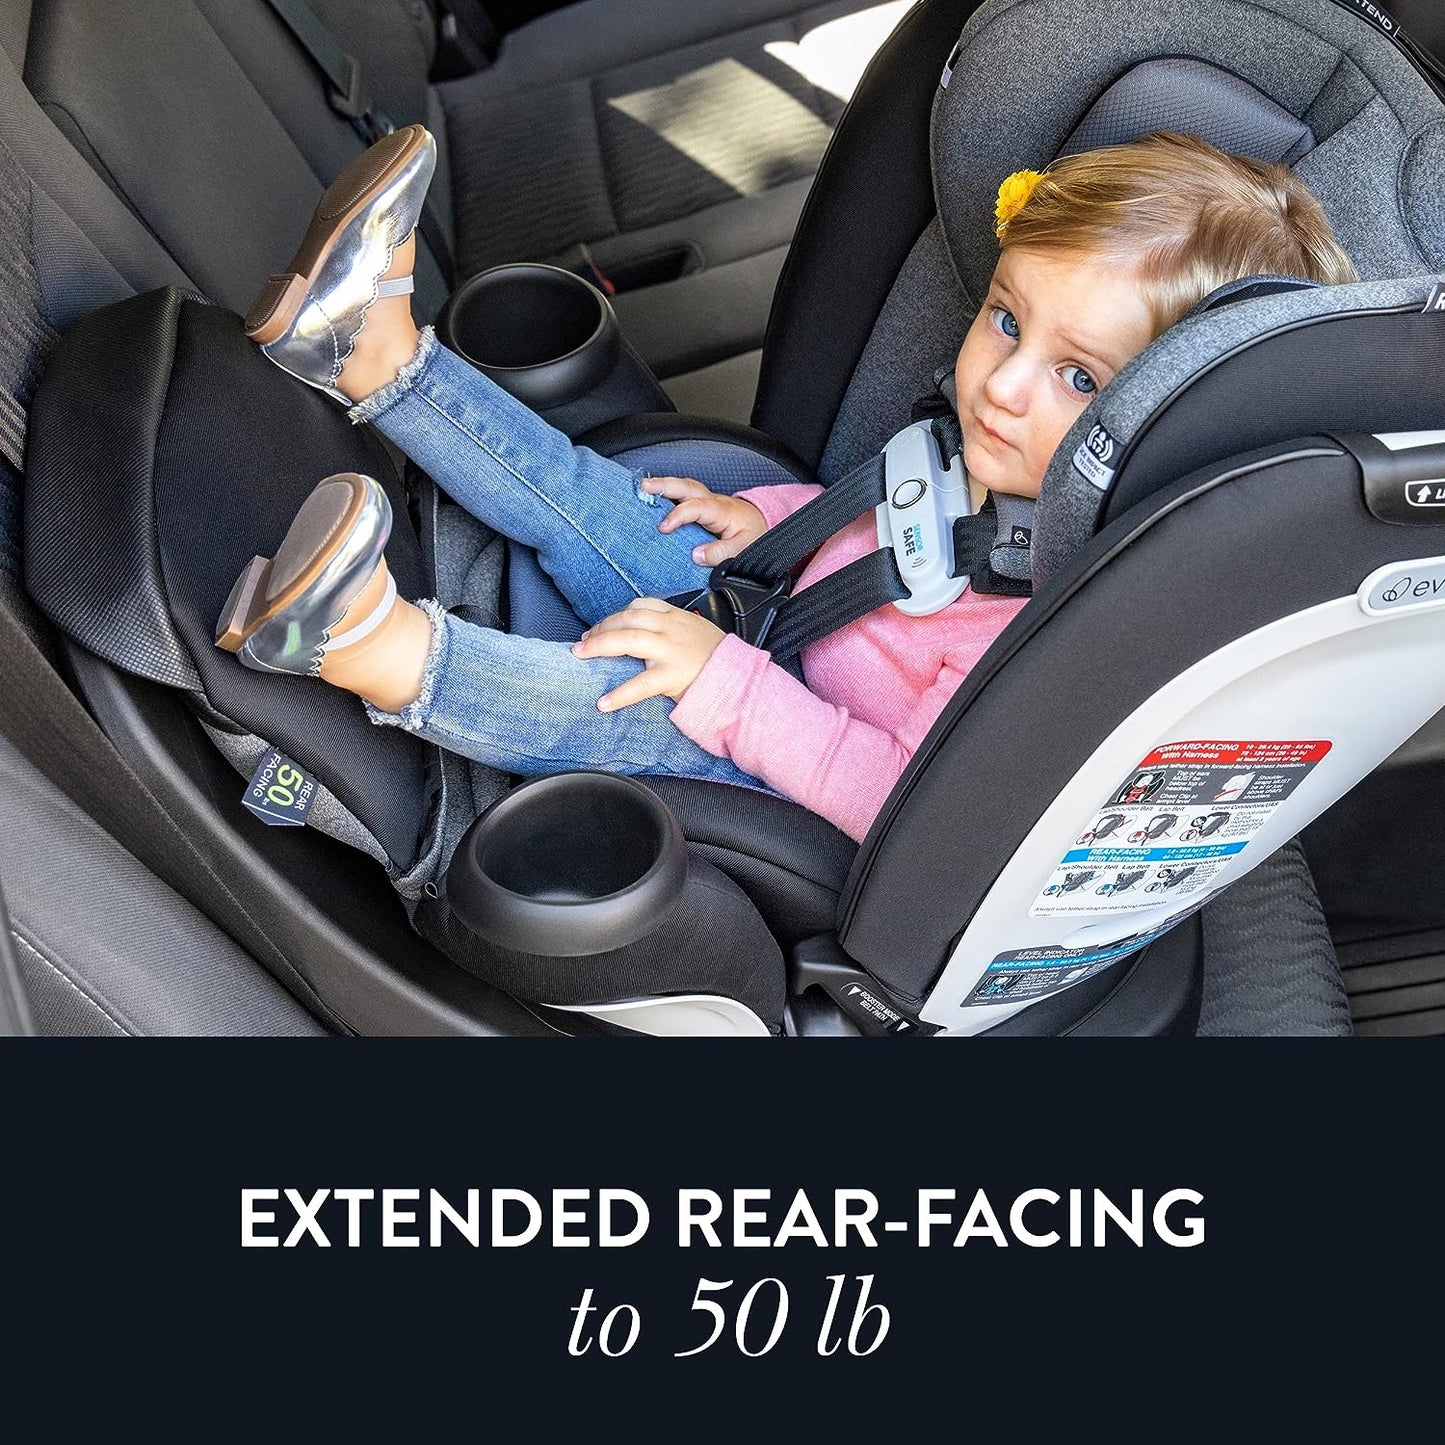 New Evenflo Gold Revolve360 Extend All-in-One Rotational Car Seat (Moonstone Gray)